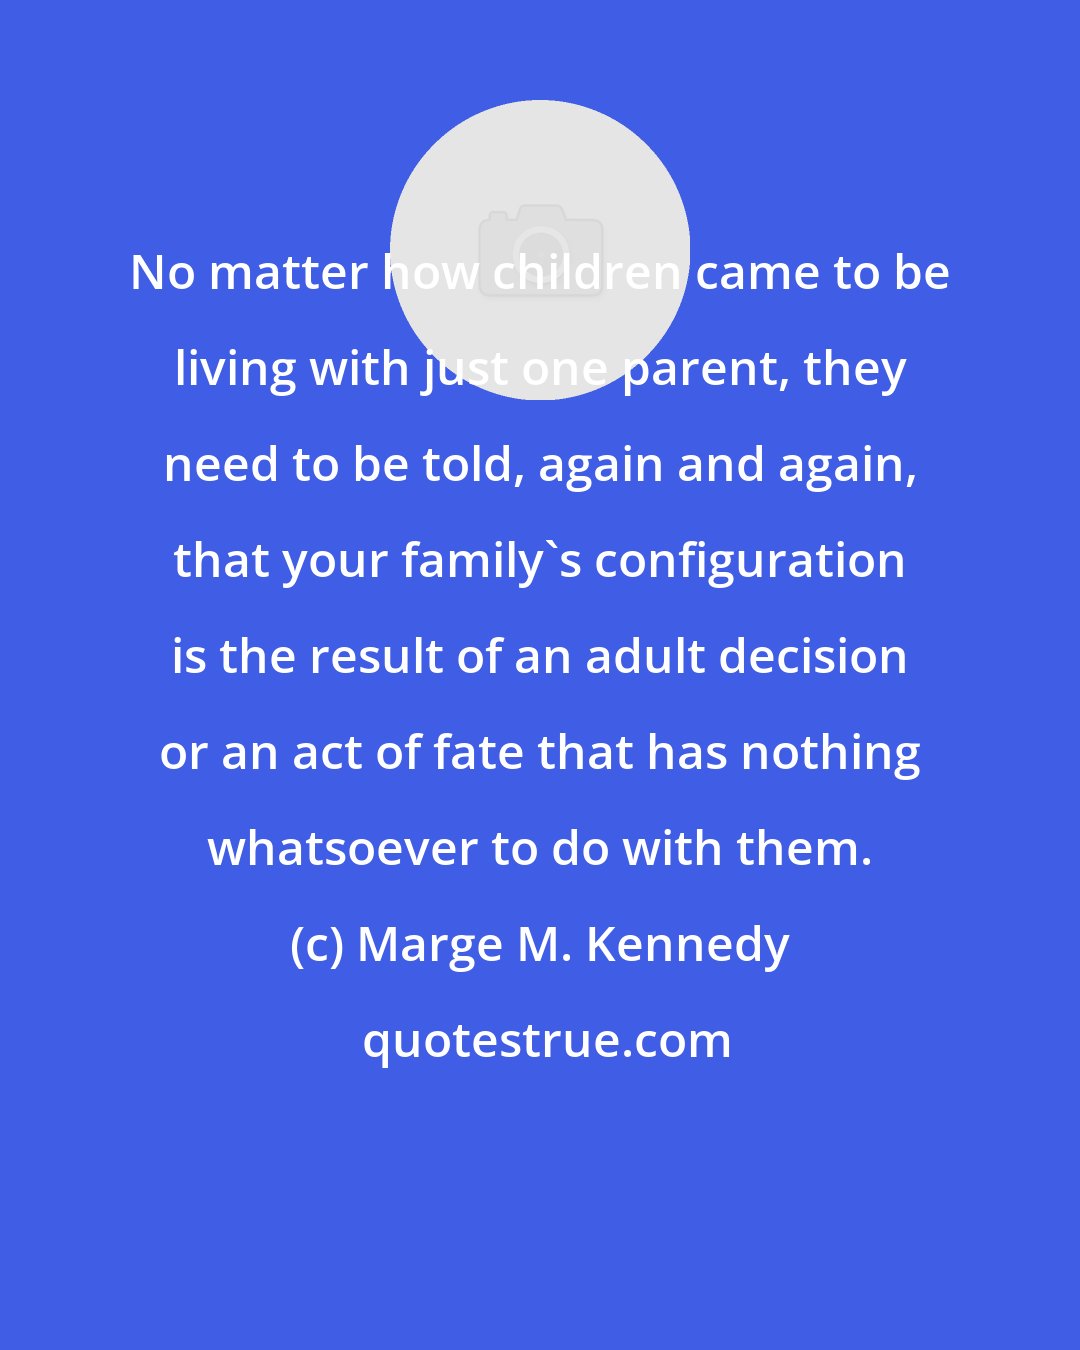 Marge M. Kennedy: No matter how children came to be living with just one parent, they need to be told, again and again, that your family's configuration is the result of an adult decision or an act of fate that has nothing whatsoever to do with them.